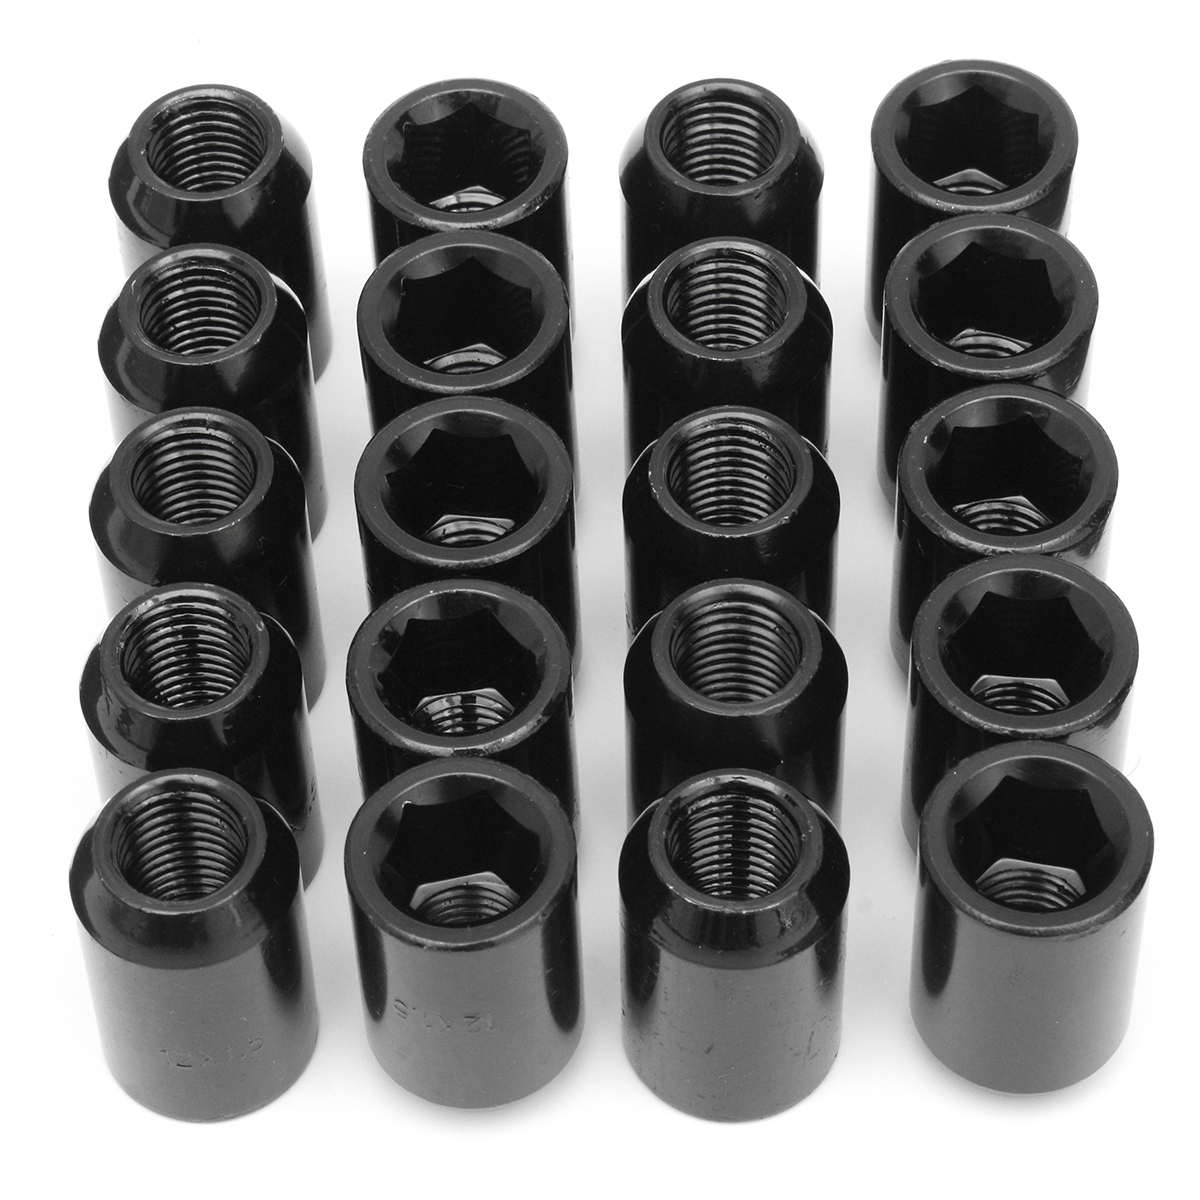 20Pc Black Steel Wheel Tuner Nuts M12X1.5 for HONDA for MAZDA for TOYOTA for MITSUBISHI for FORD